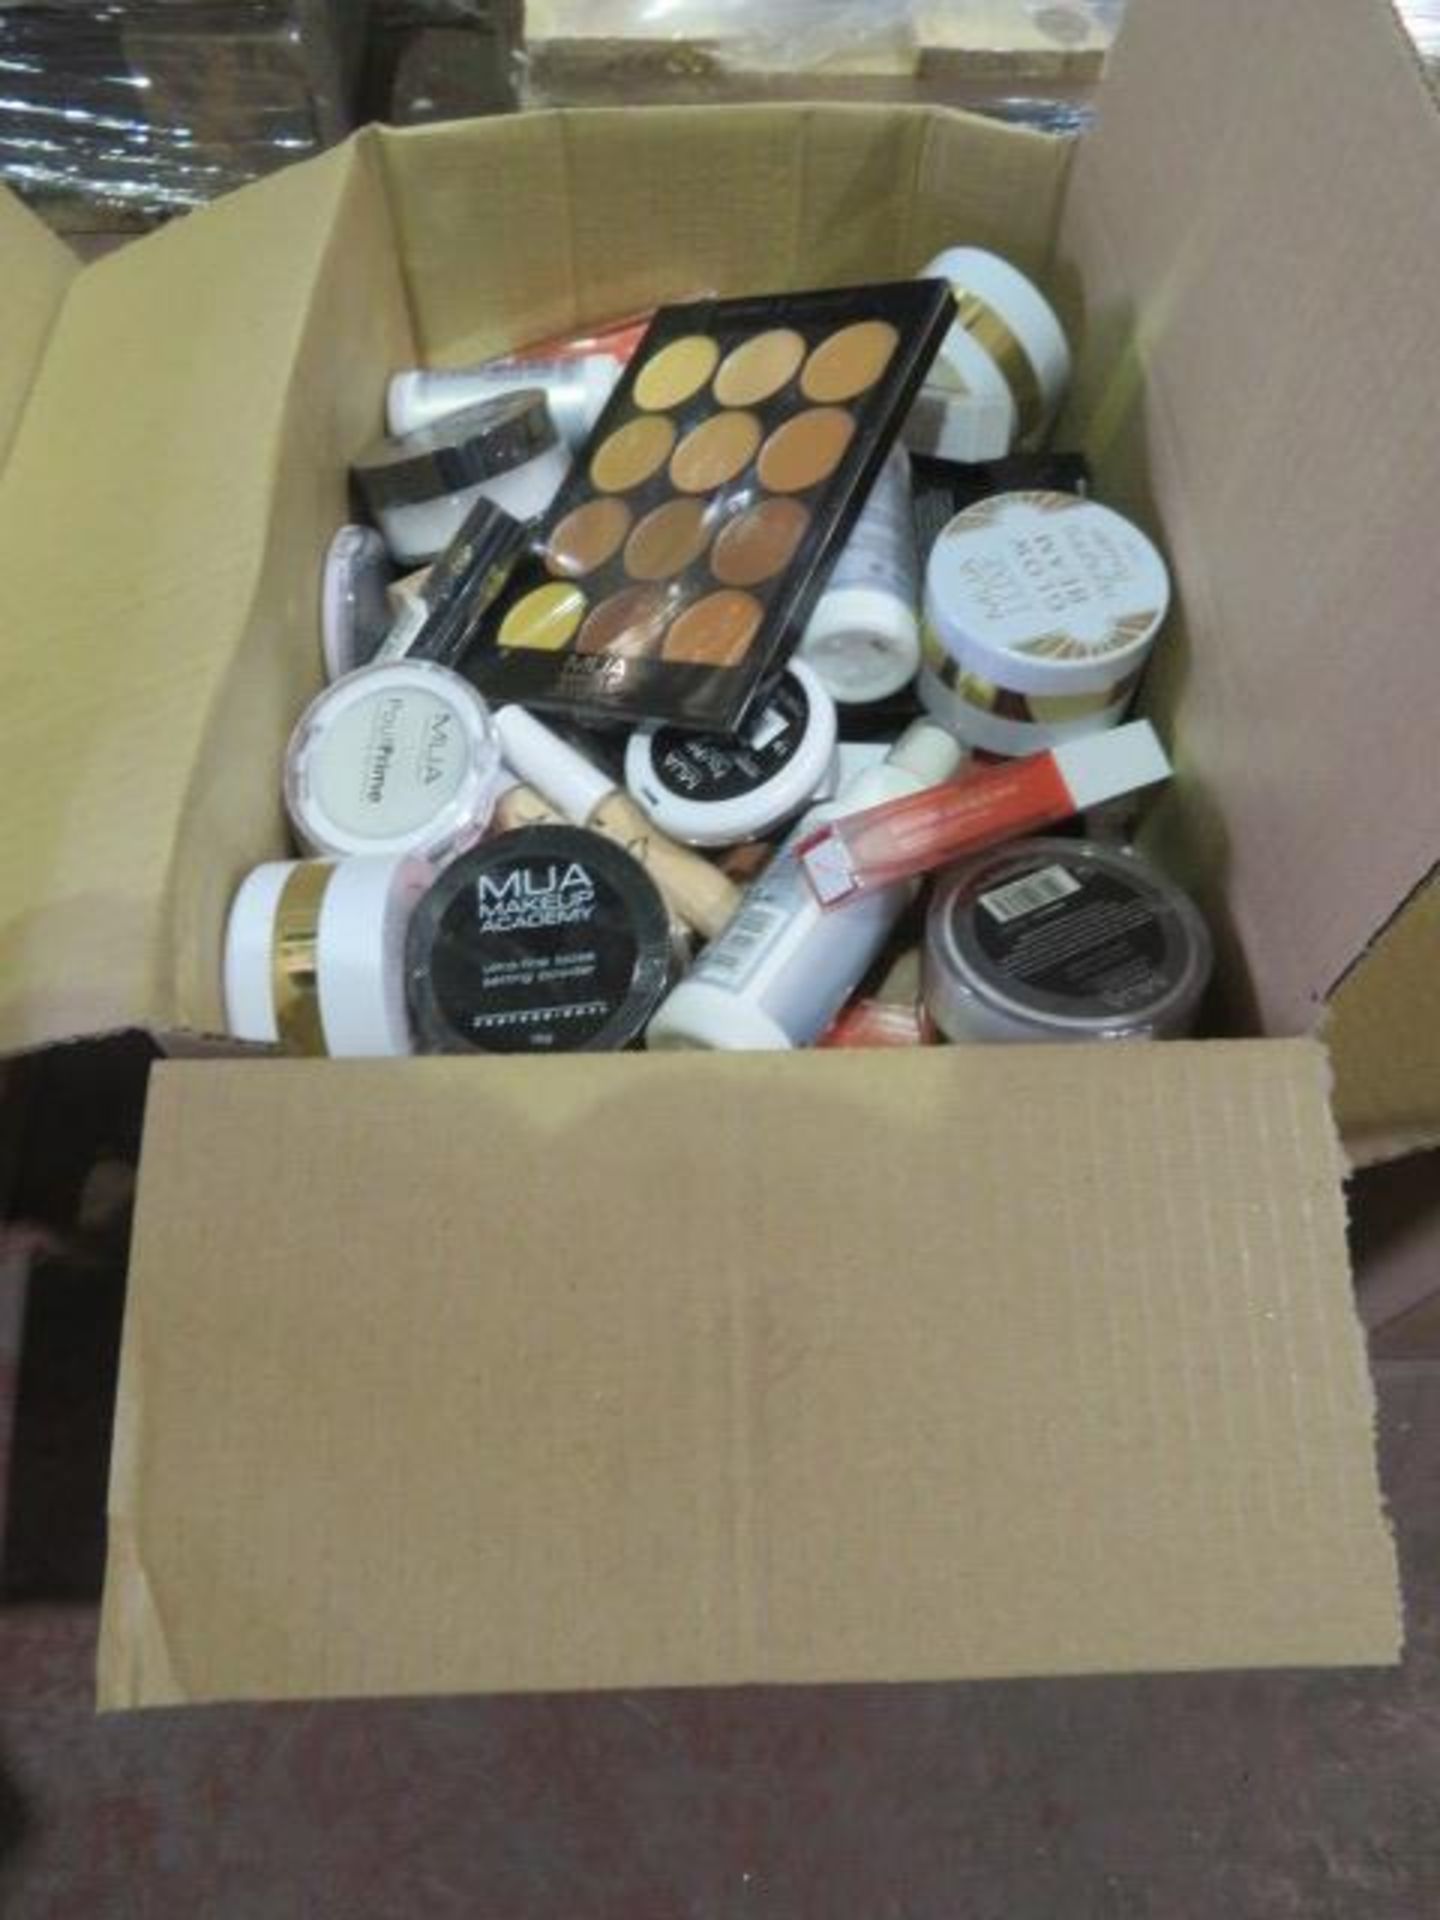 Circa. 200 items of various new make up acadamy make up to include: correct and conceal palette... - Image 2 of 2